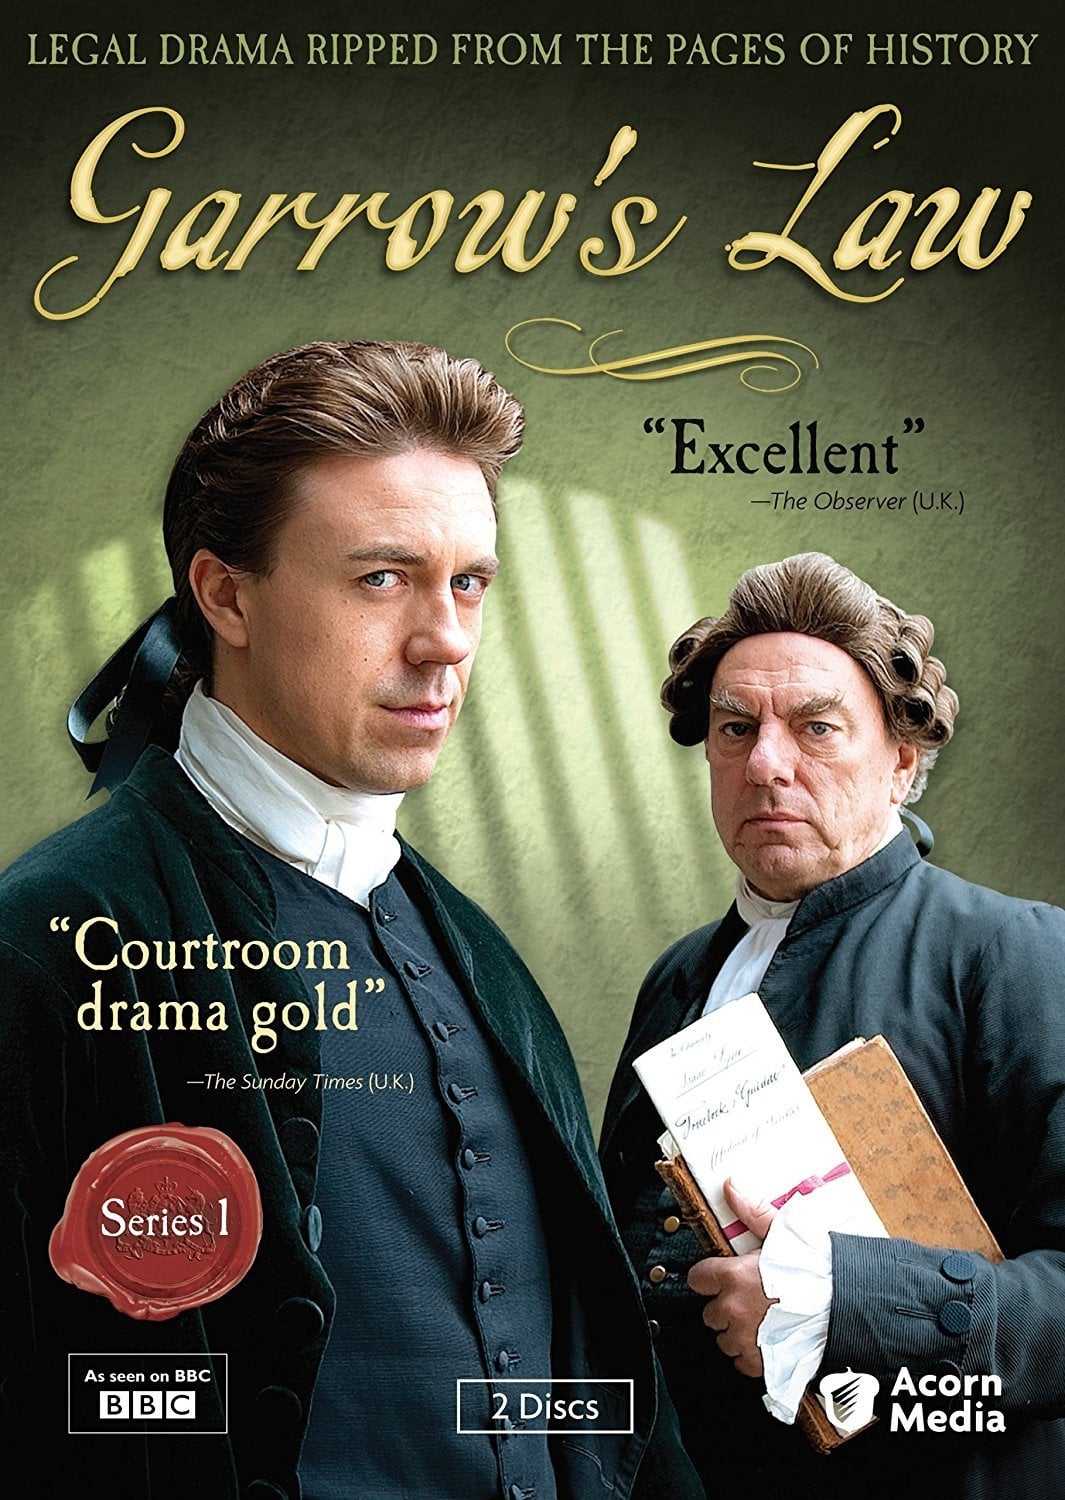 Garrow's Law TV Shows About 18th Century